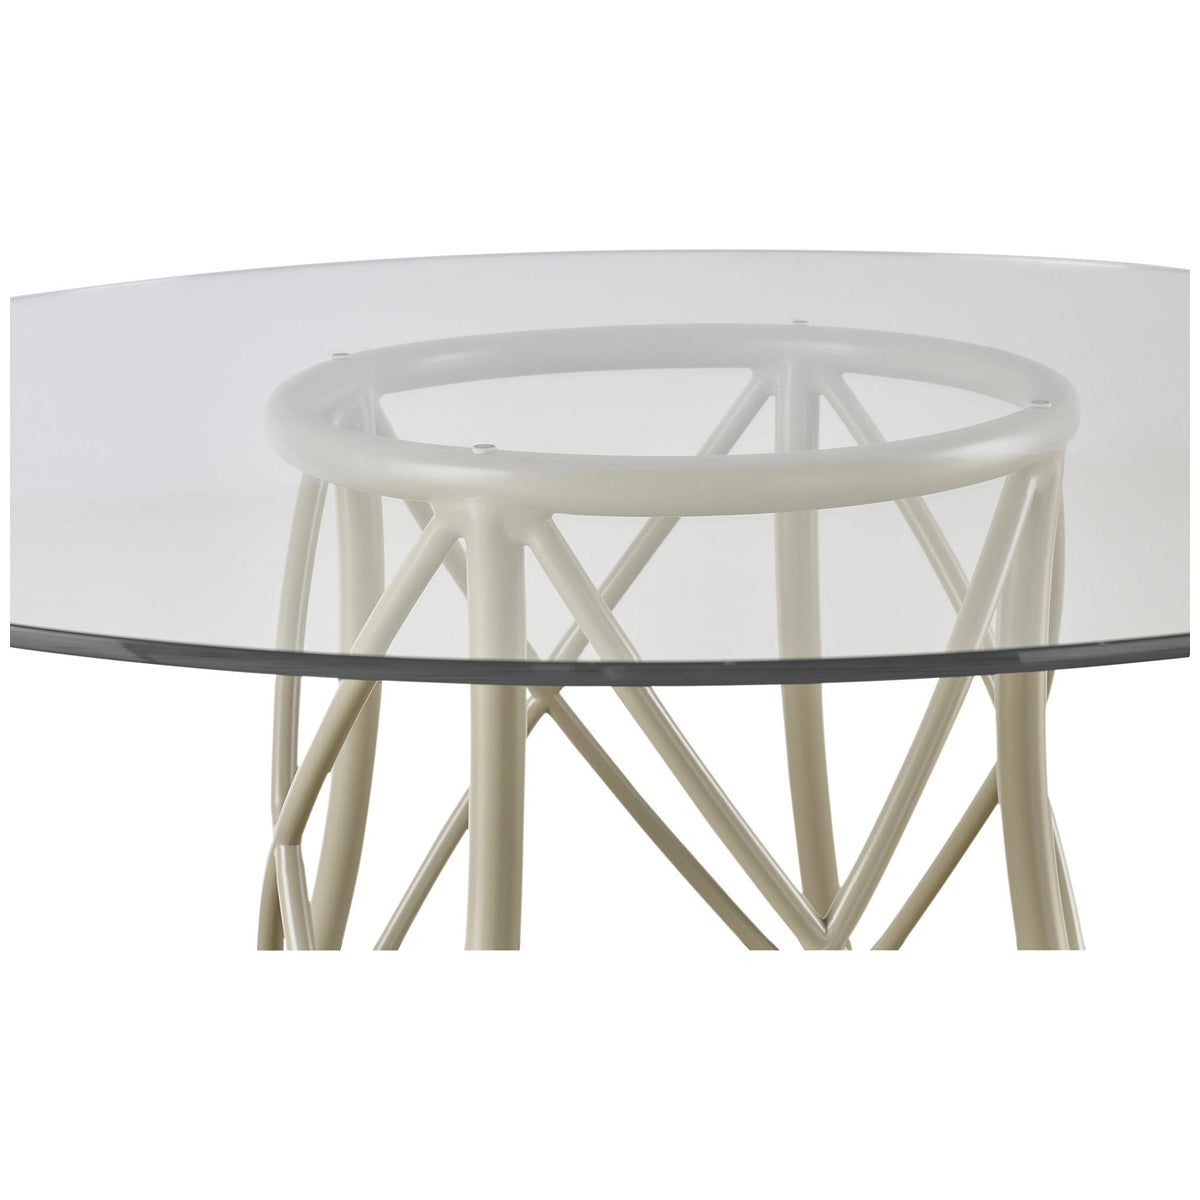 Baker Furniture Gondola Outdoor Round Dining Table MCO3036